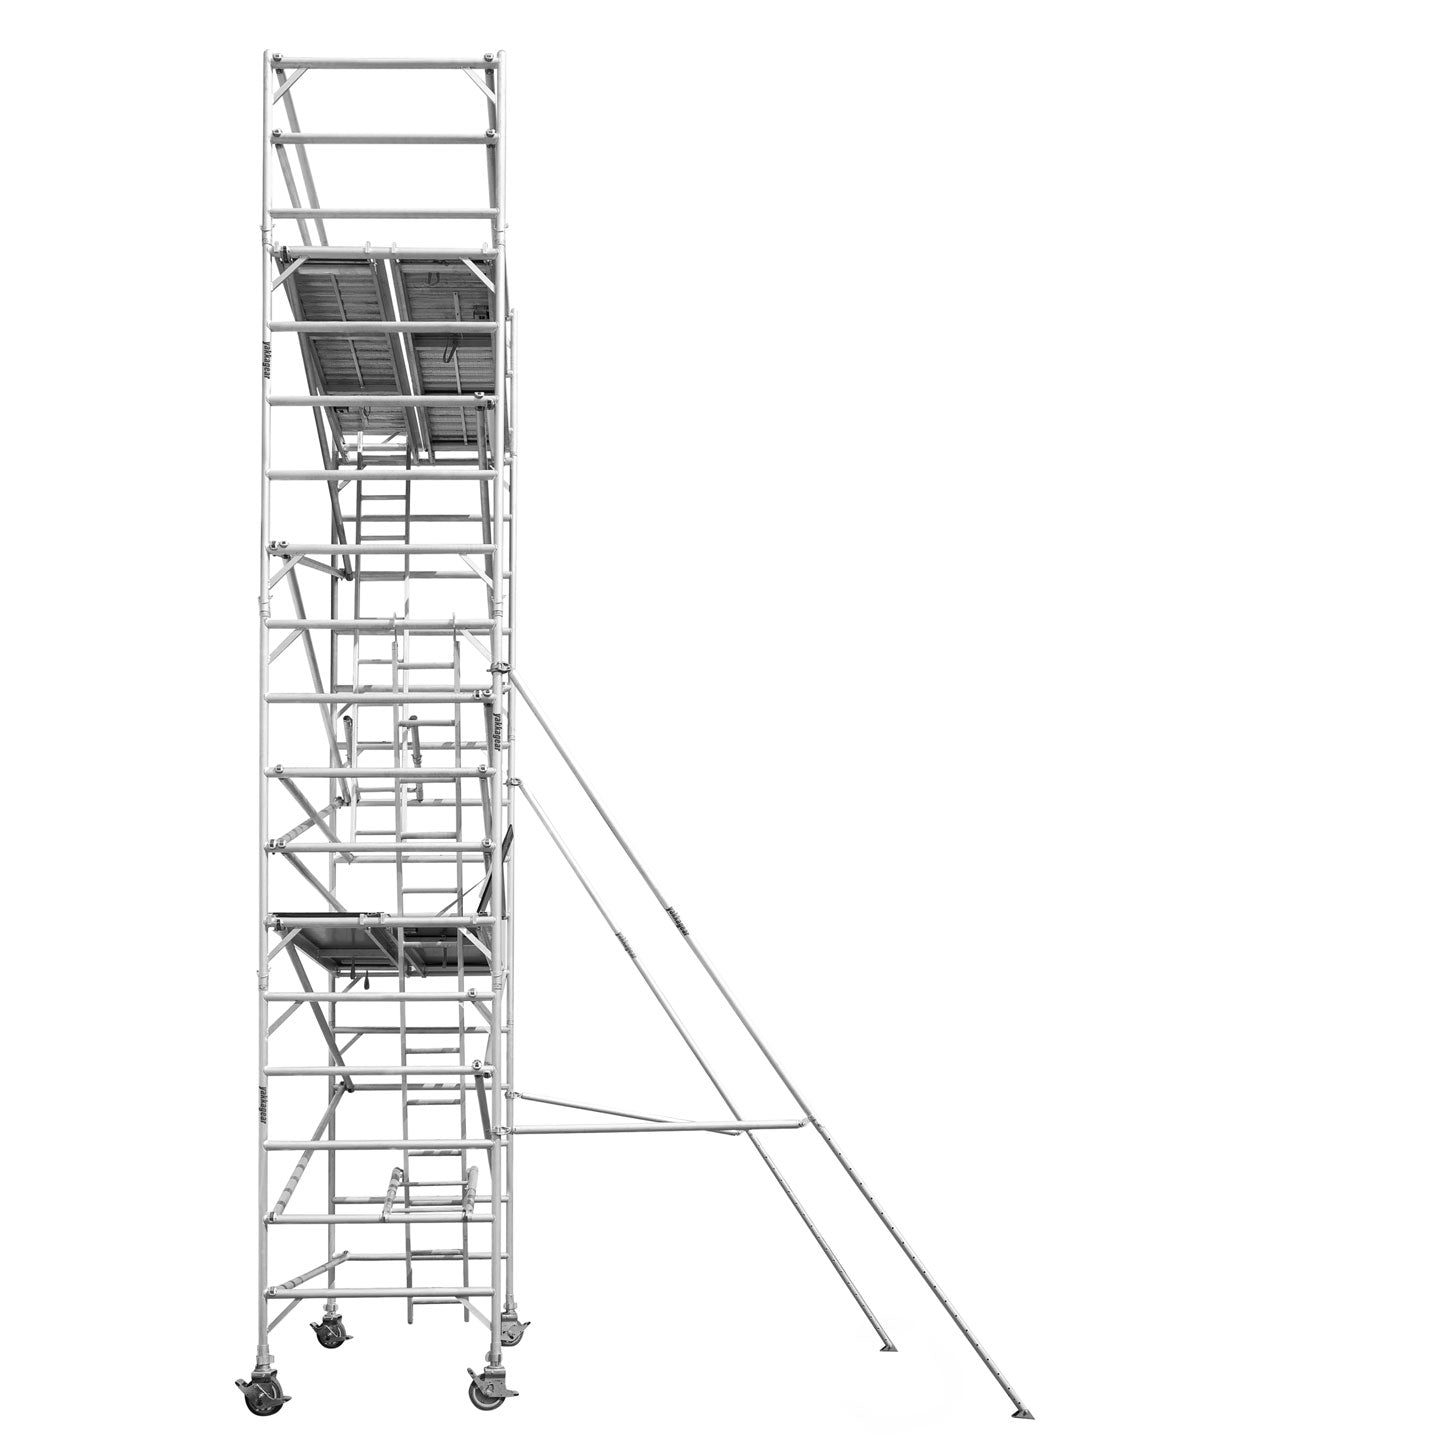 Yakka Gear Australia 2.5m Length 1.3m Wide 8.6m reach wide scaffolding tower access equipment with working height of 6.6m, view from the side showing the extruding supporting legs outriggers.  